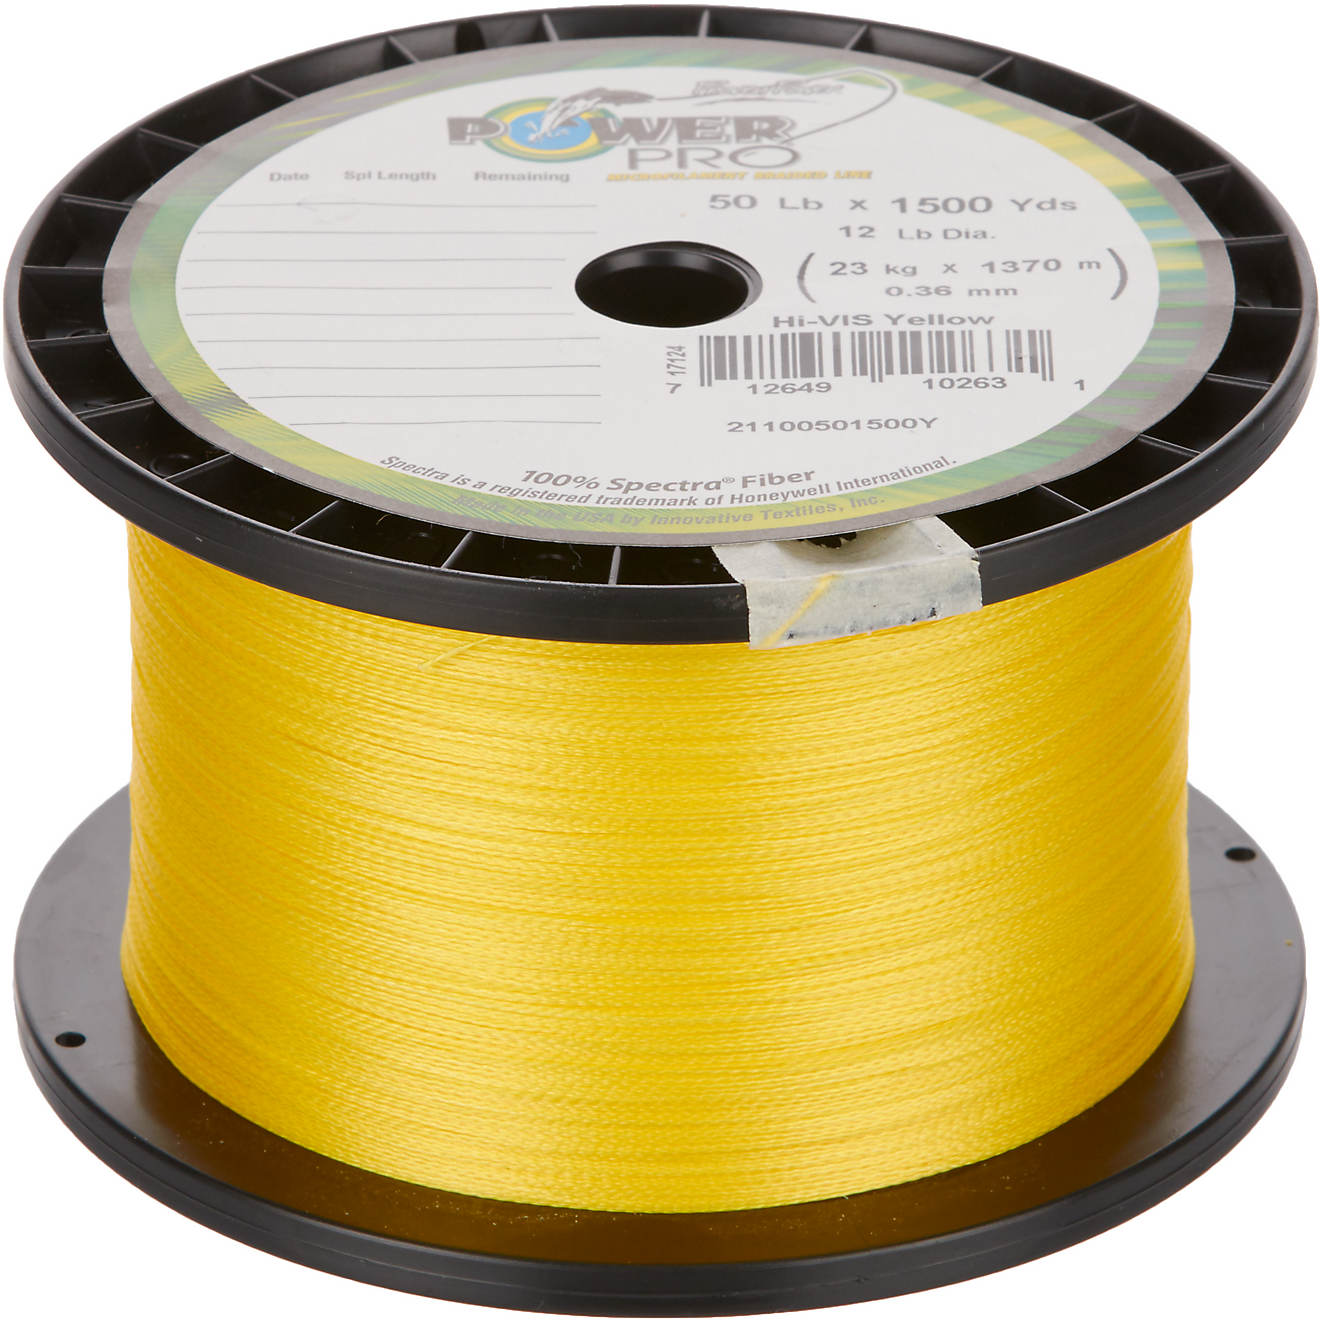 Power Pro Spectra Fiber Braided Fishing Line Yellow for sale online 50 lbs 1500 Yards 